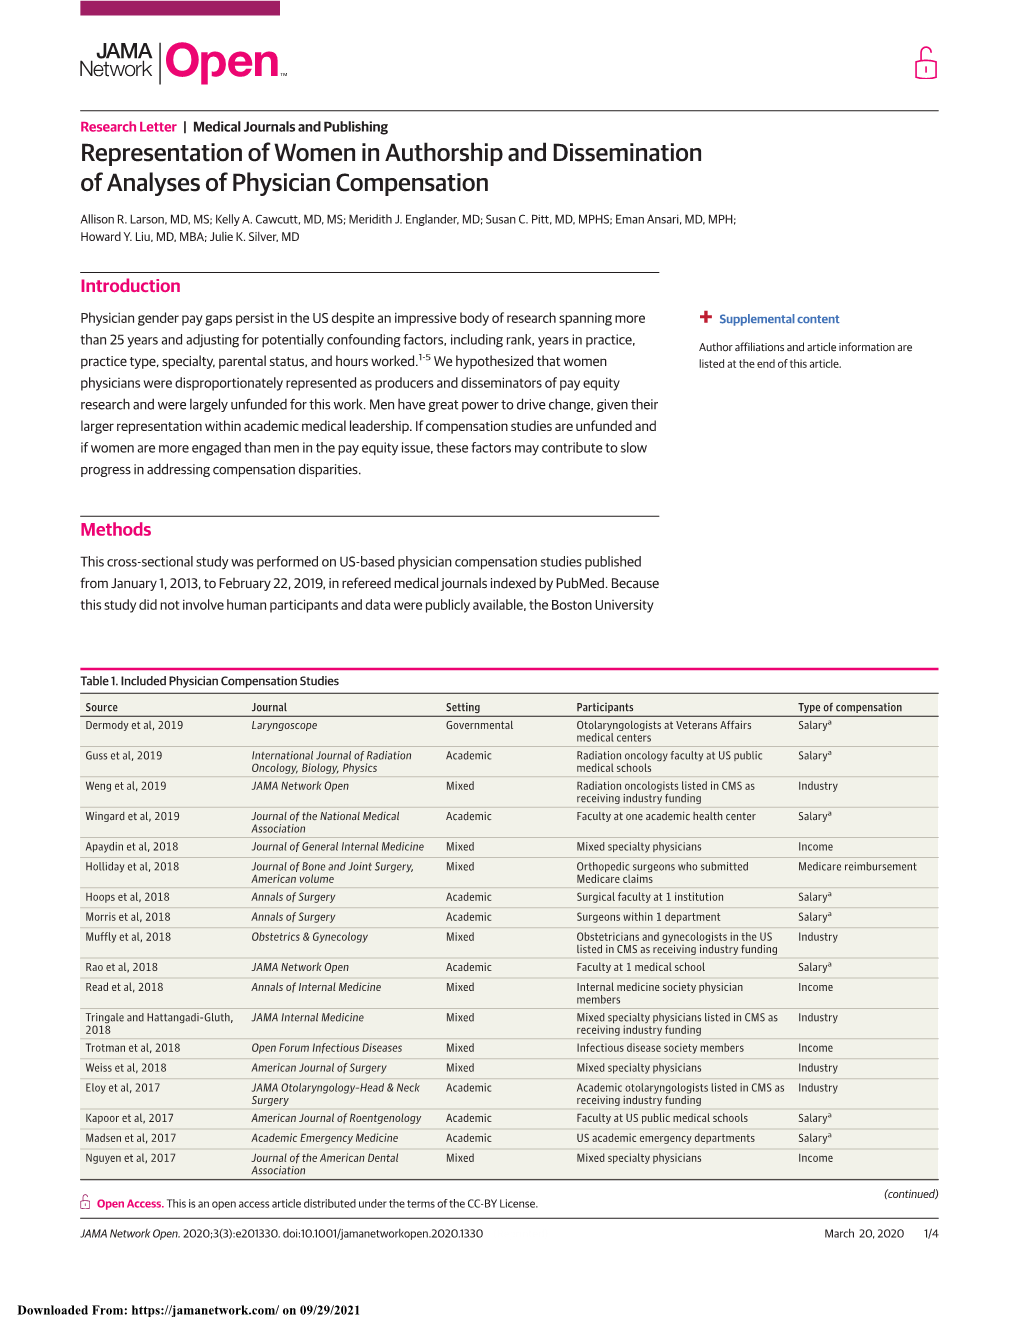 Representation of Women in Authorship and Dissemination of Analyses of Physician Compensation